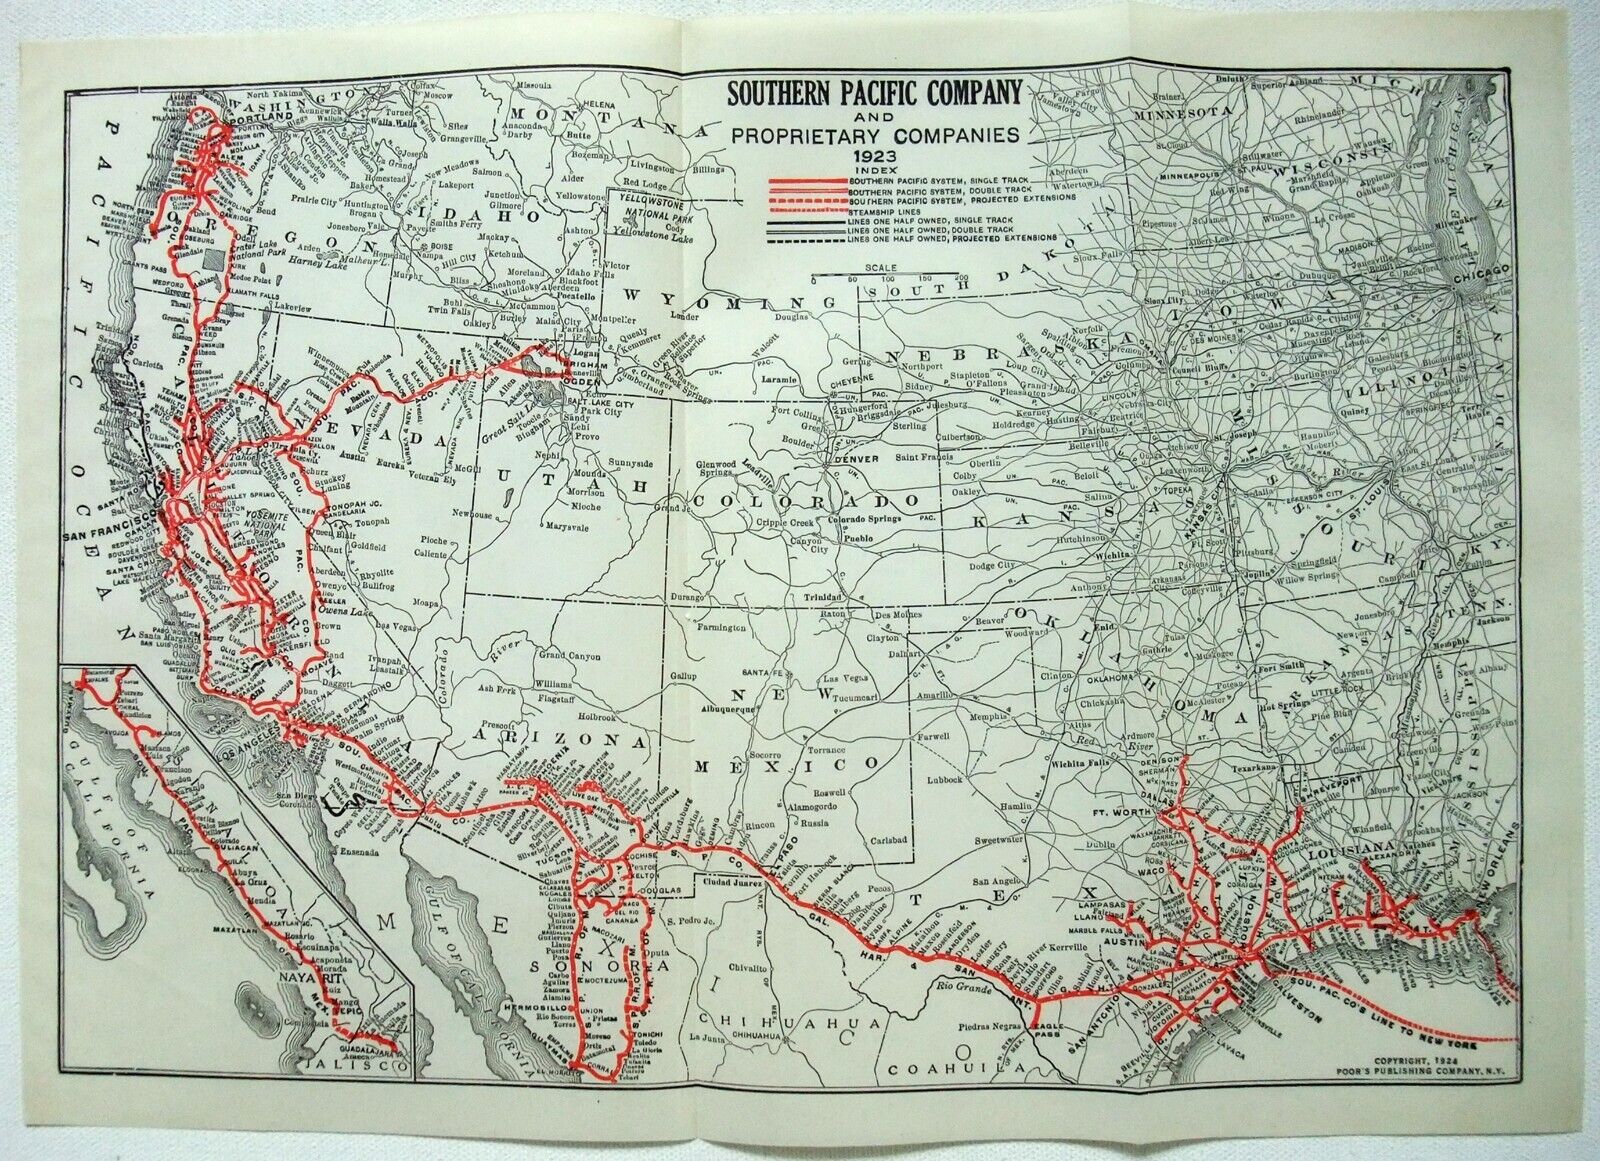 Southern Pacific Railroad - Original 1924 System Map. Antique Railway